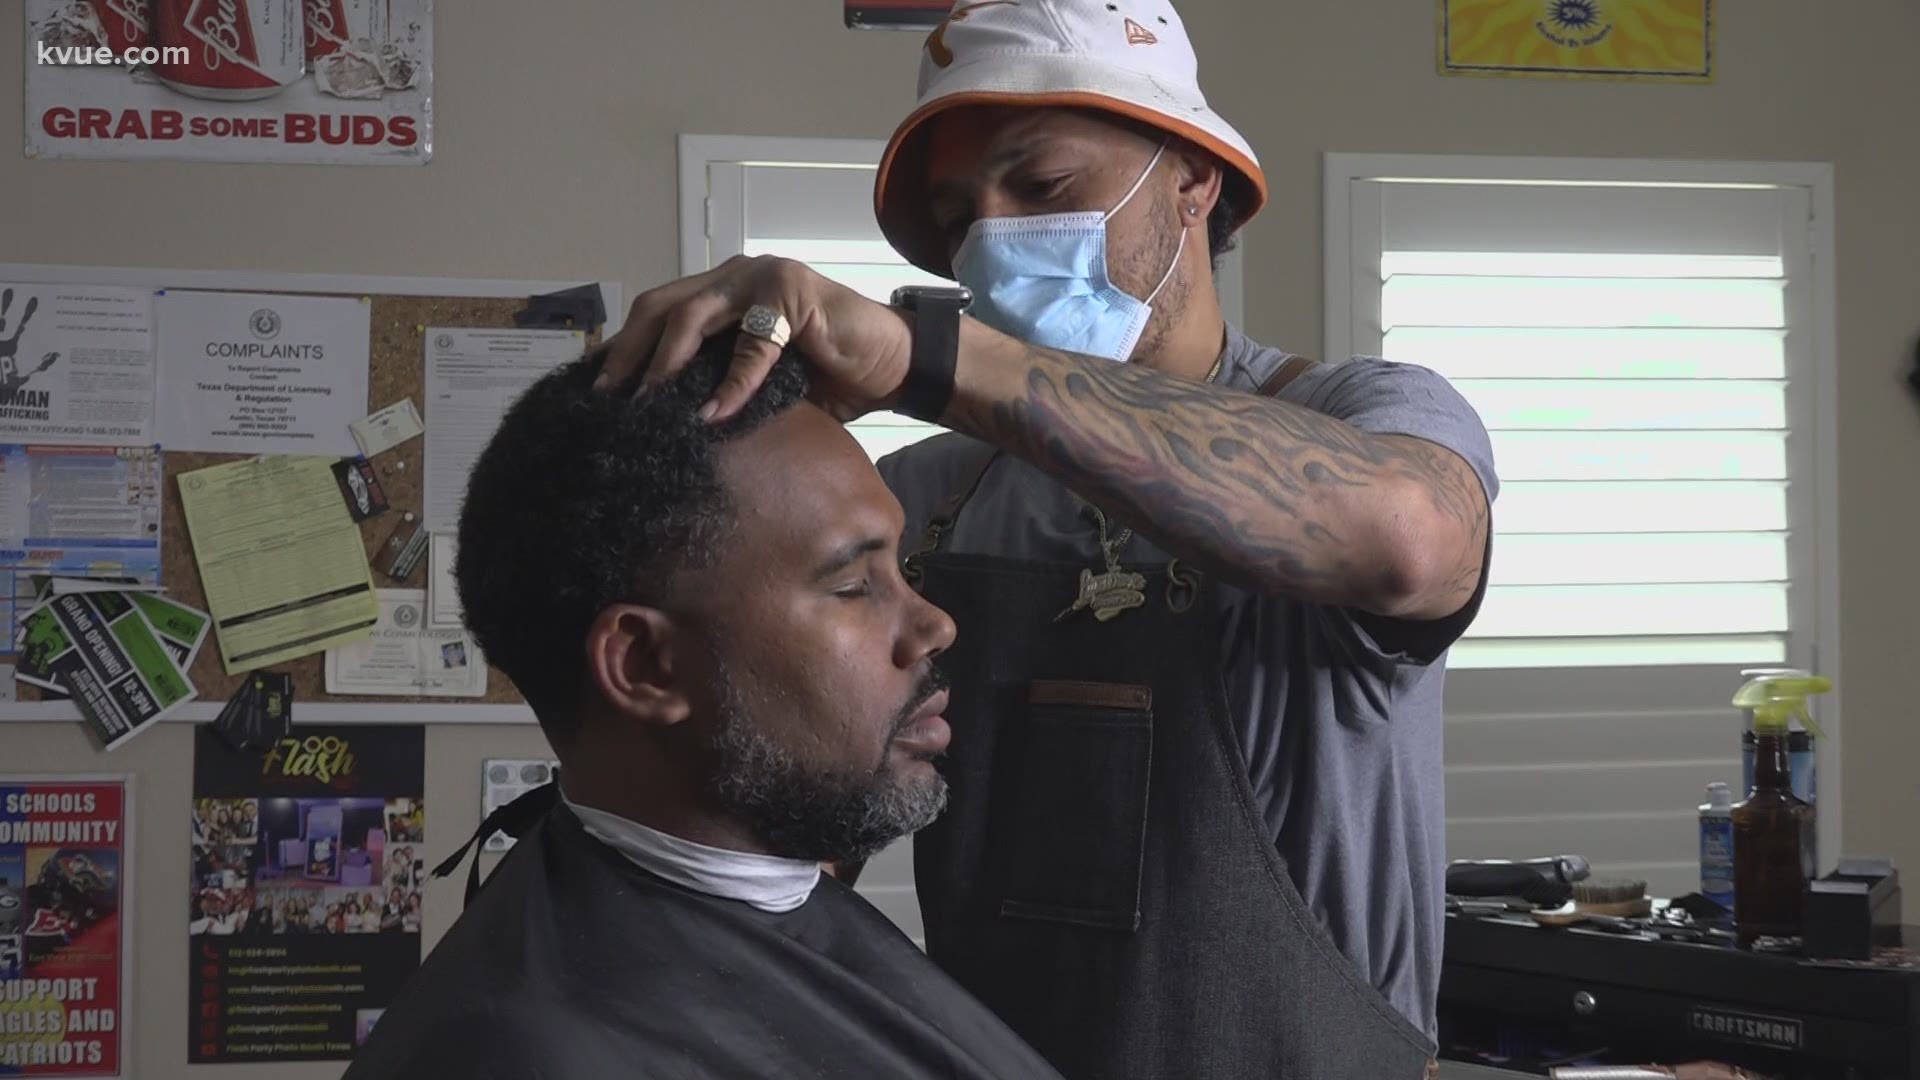 A Georgetown barber is celebrating 10 years of business after being homeless and incarcerated. He's giving not just haircuts, but also opportunities.